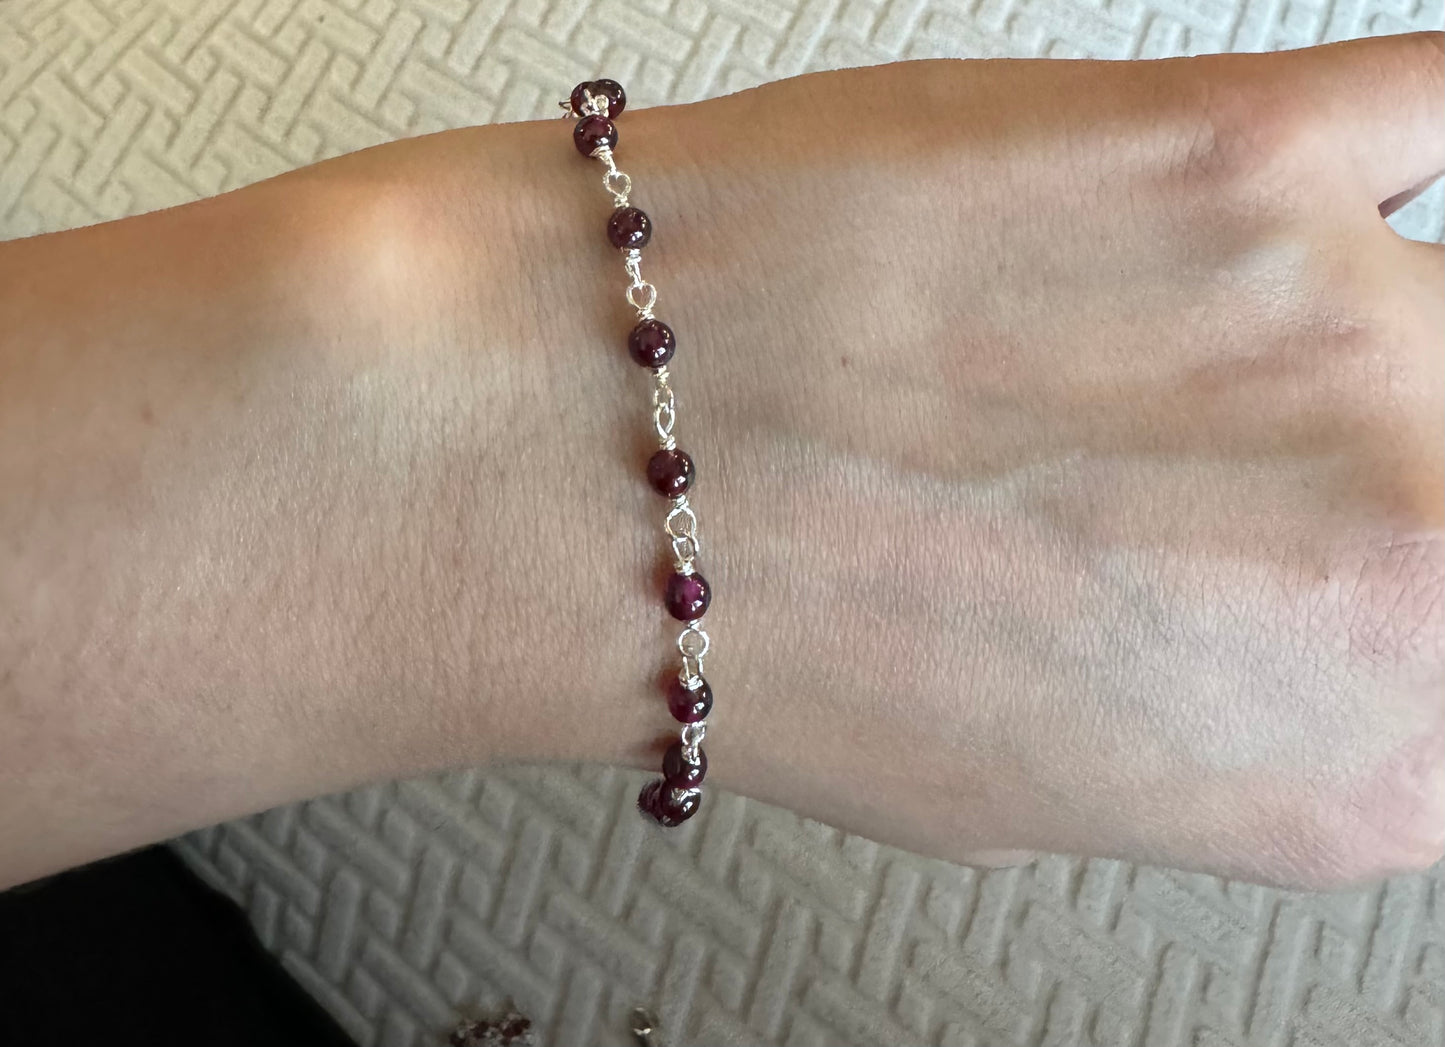 9. Silver bracelet with rounded beads 6.5 inches